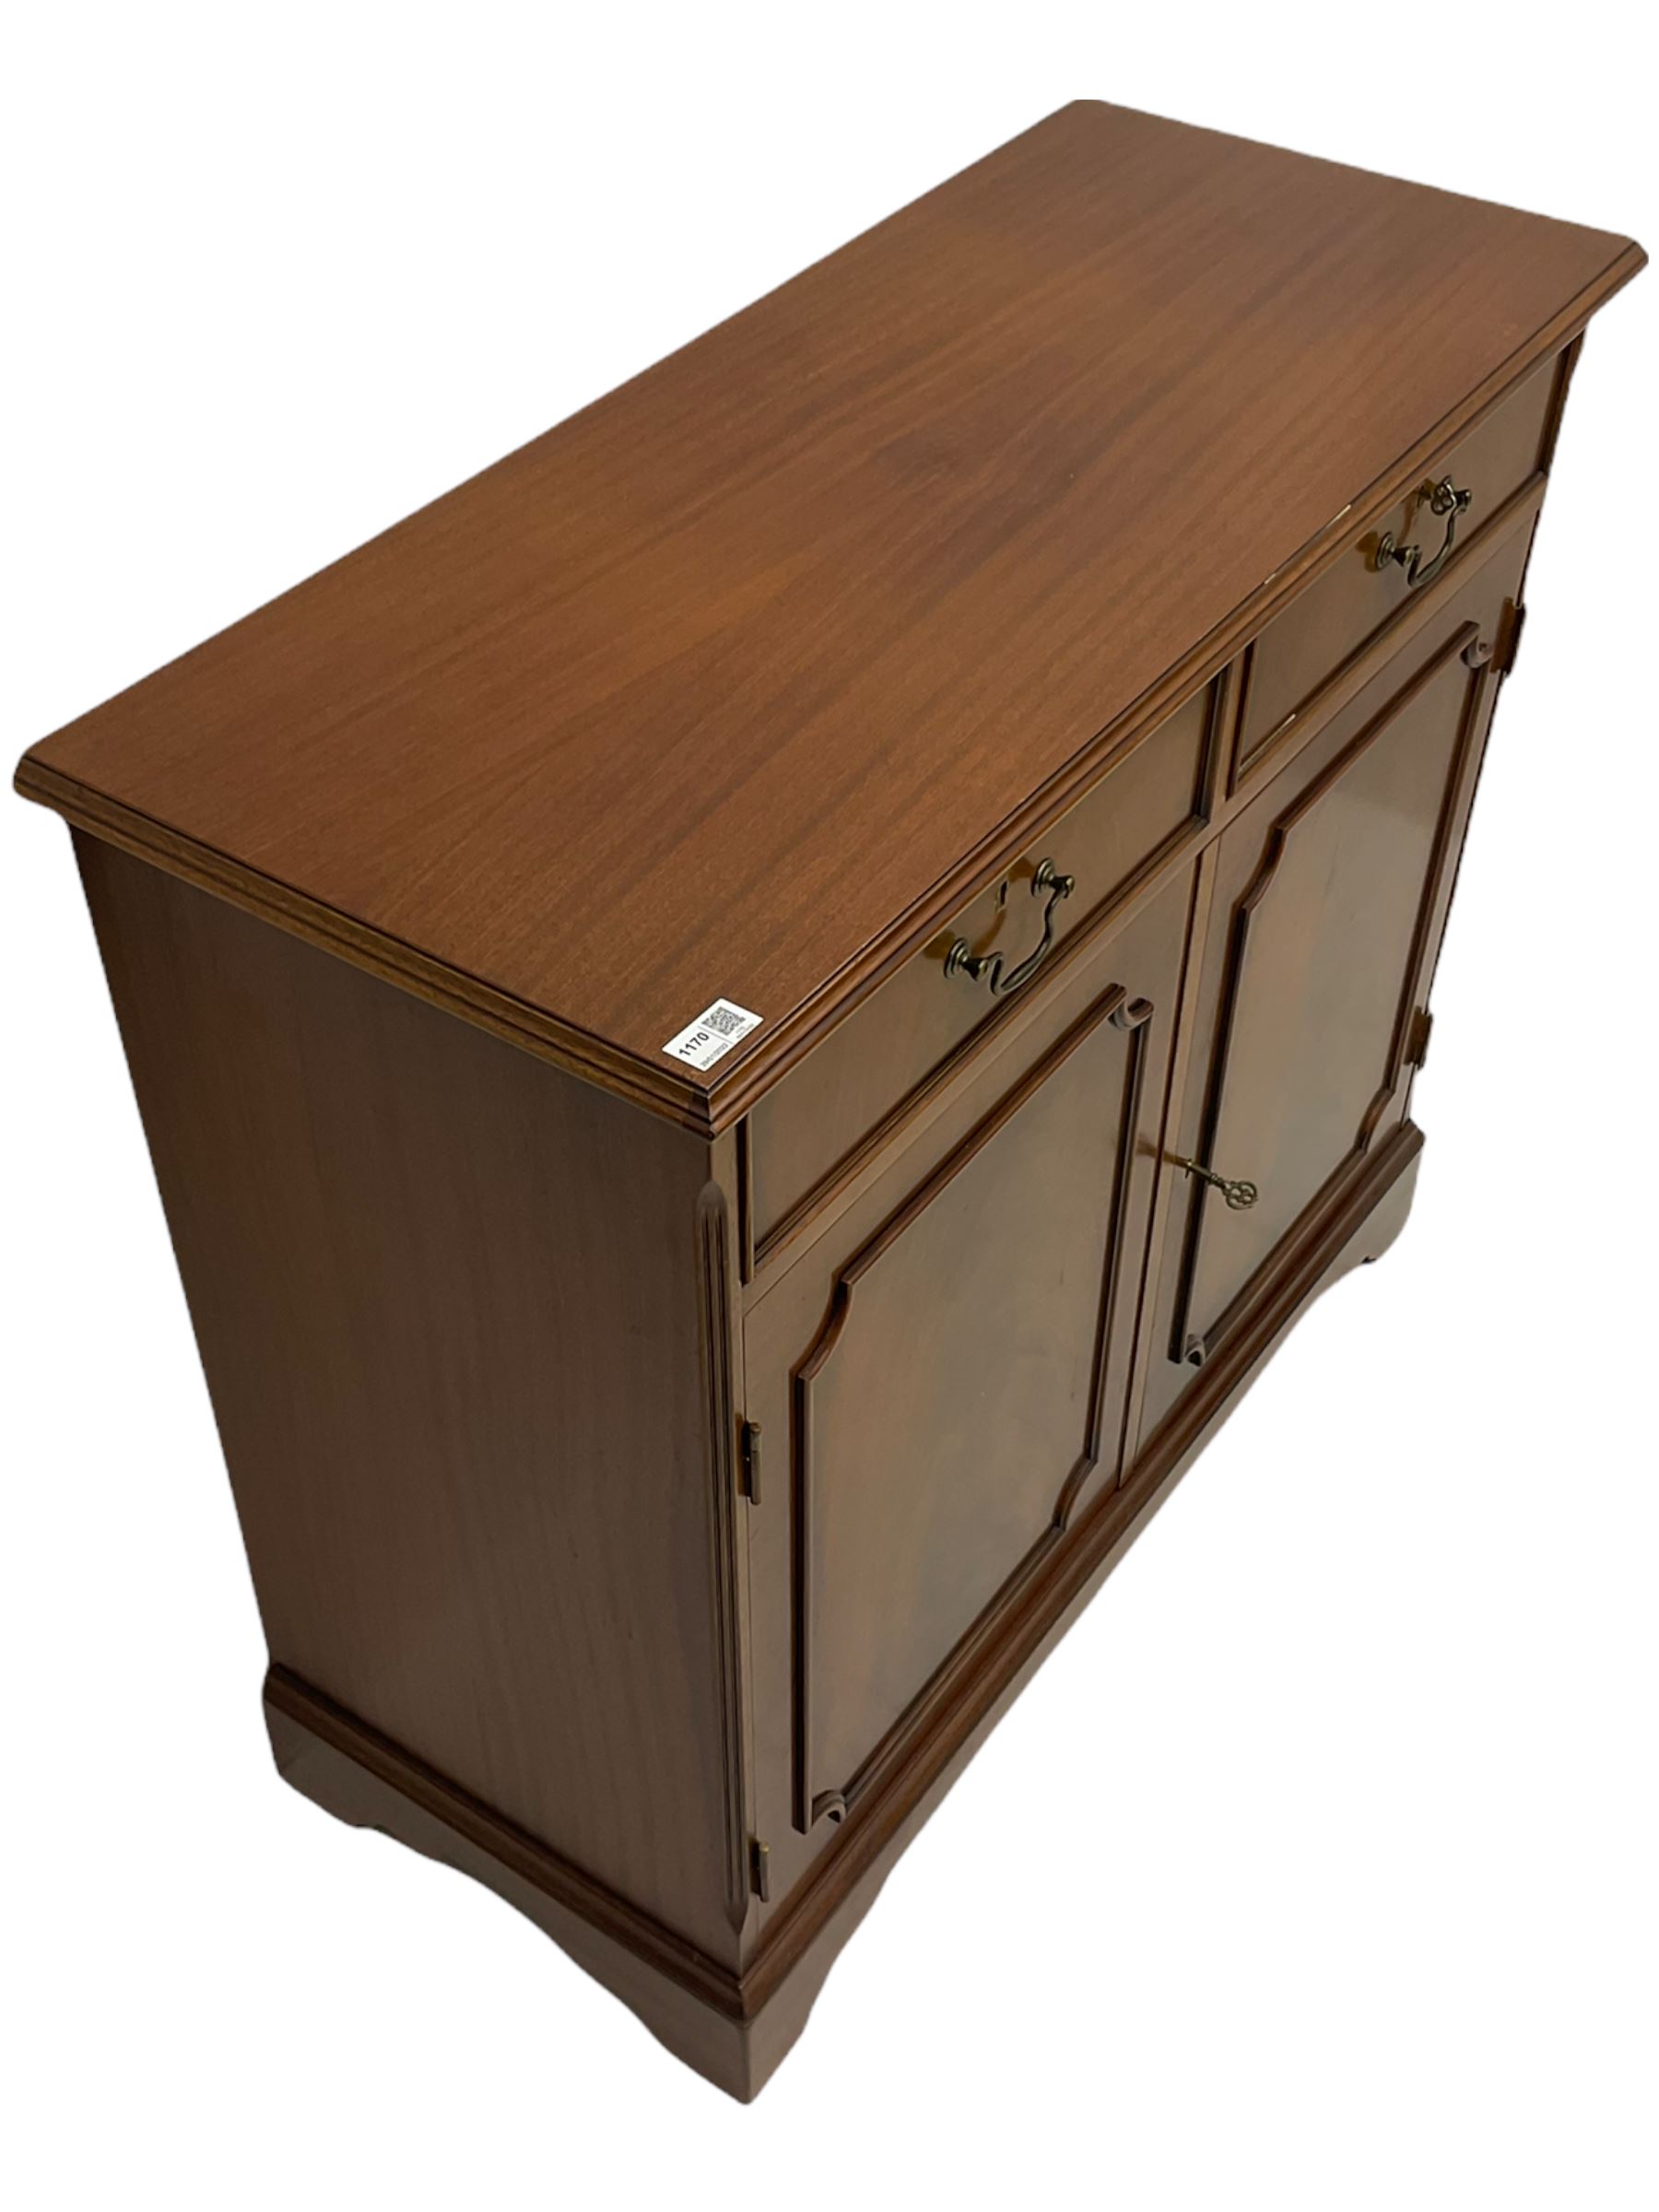 Reproduction mahogany side cabinet - Image 6 of 6